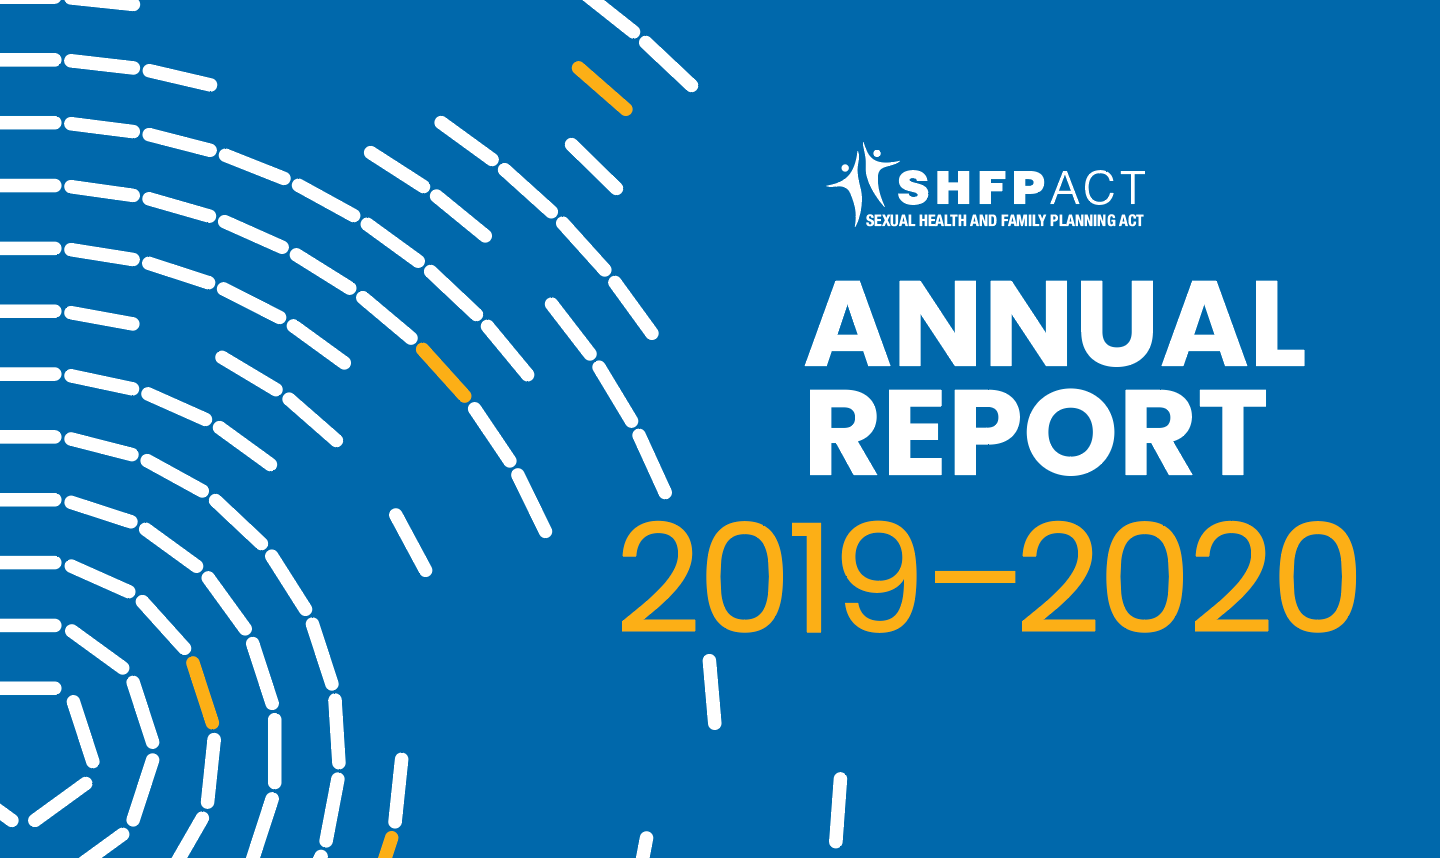 Image of SHFPACT 2019-2020 Annual Report Cover